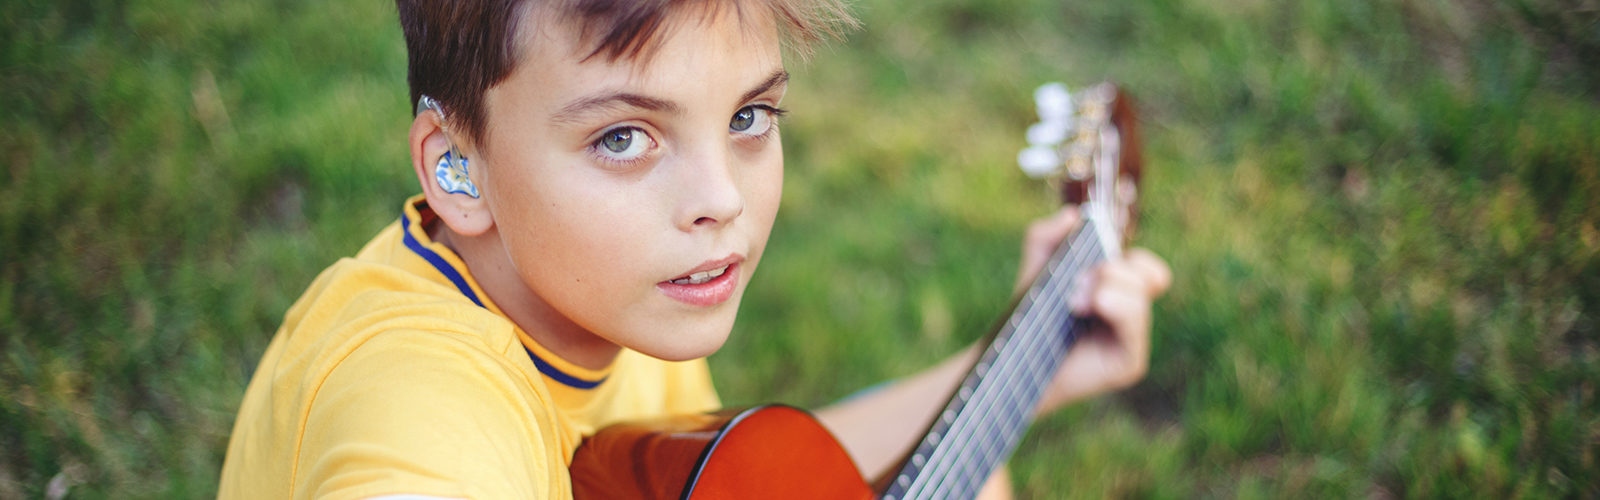 young adolescent playing guitar outside